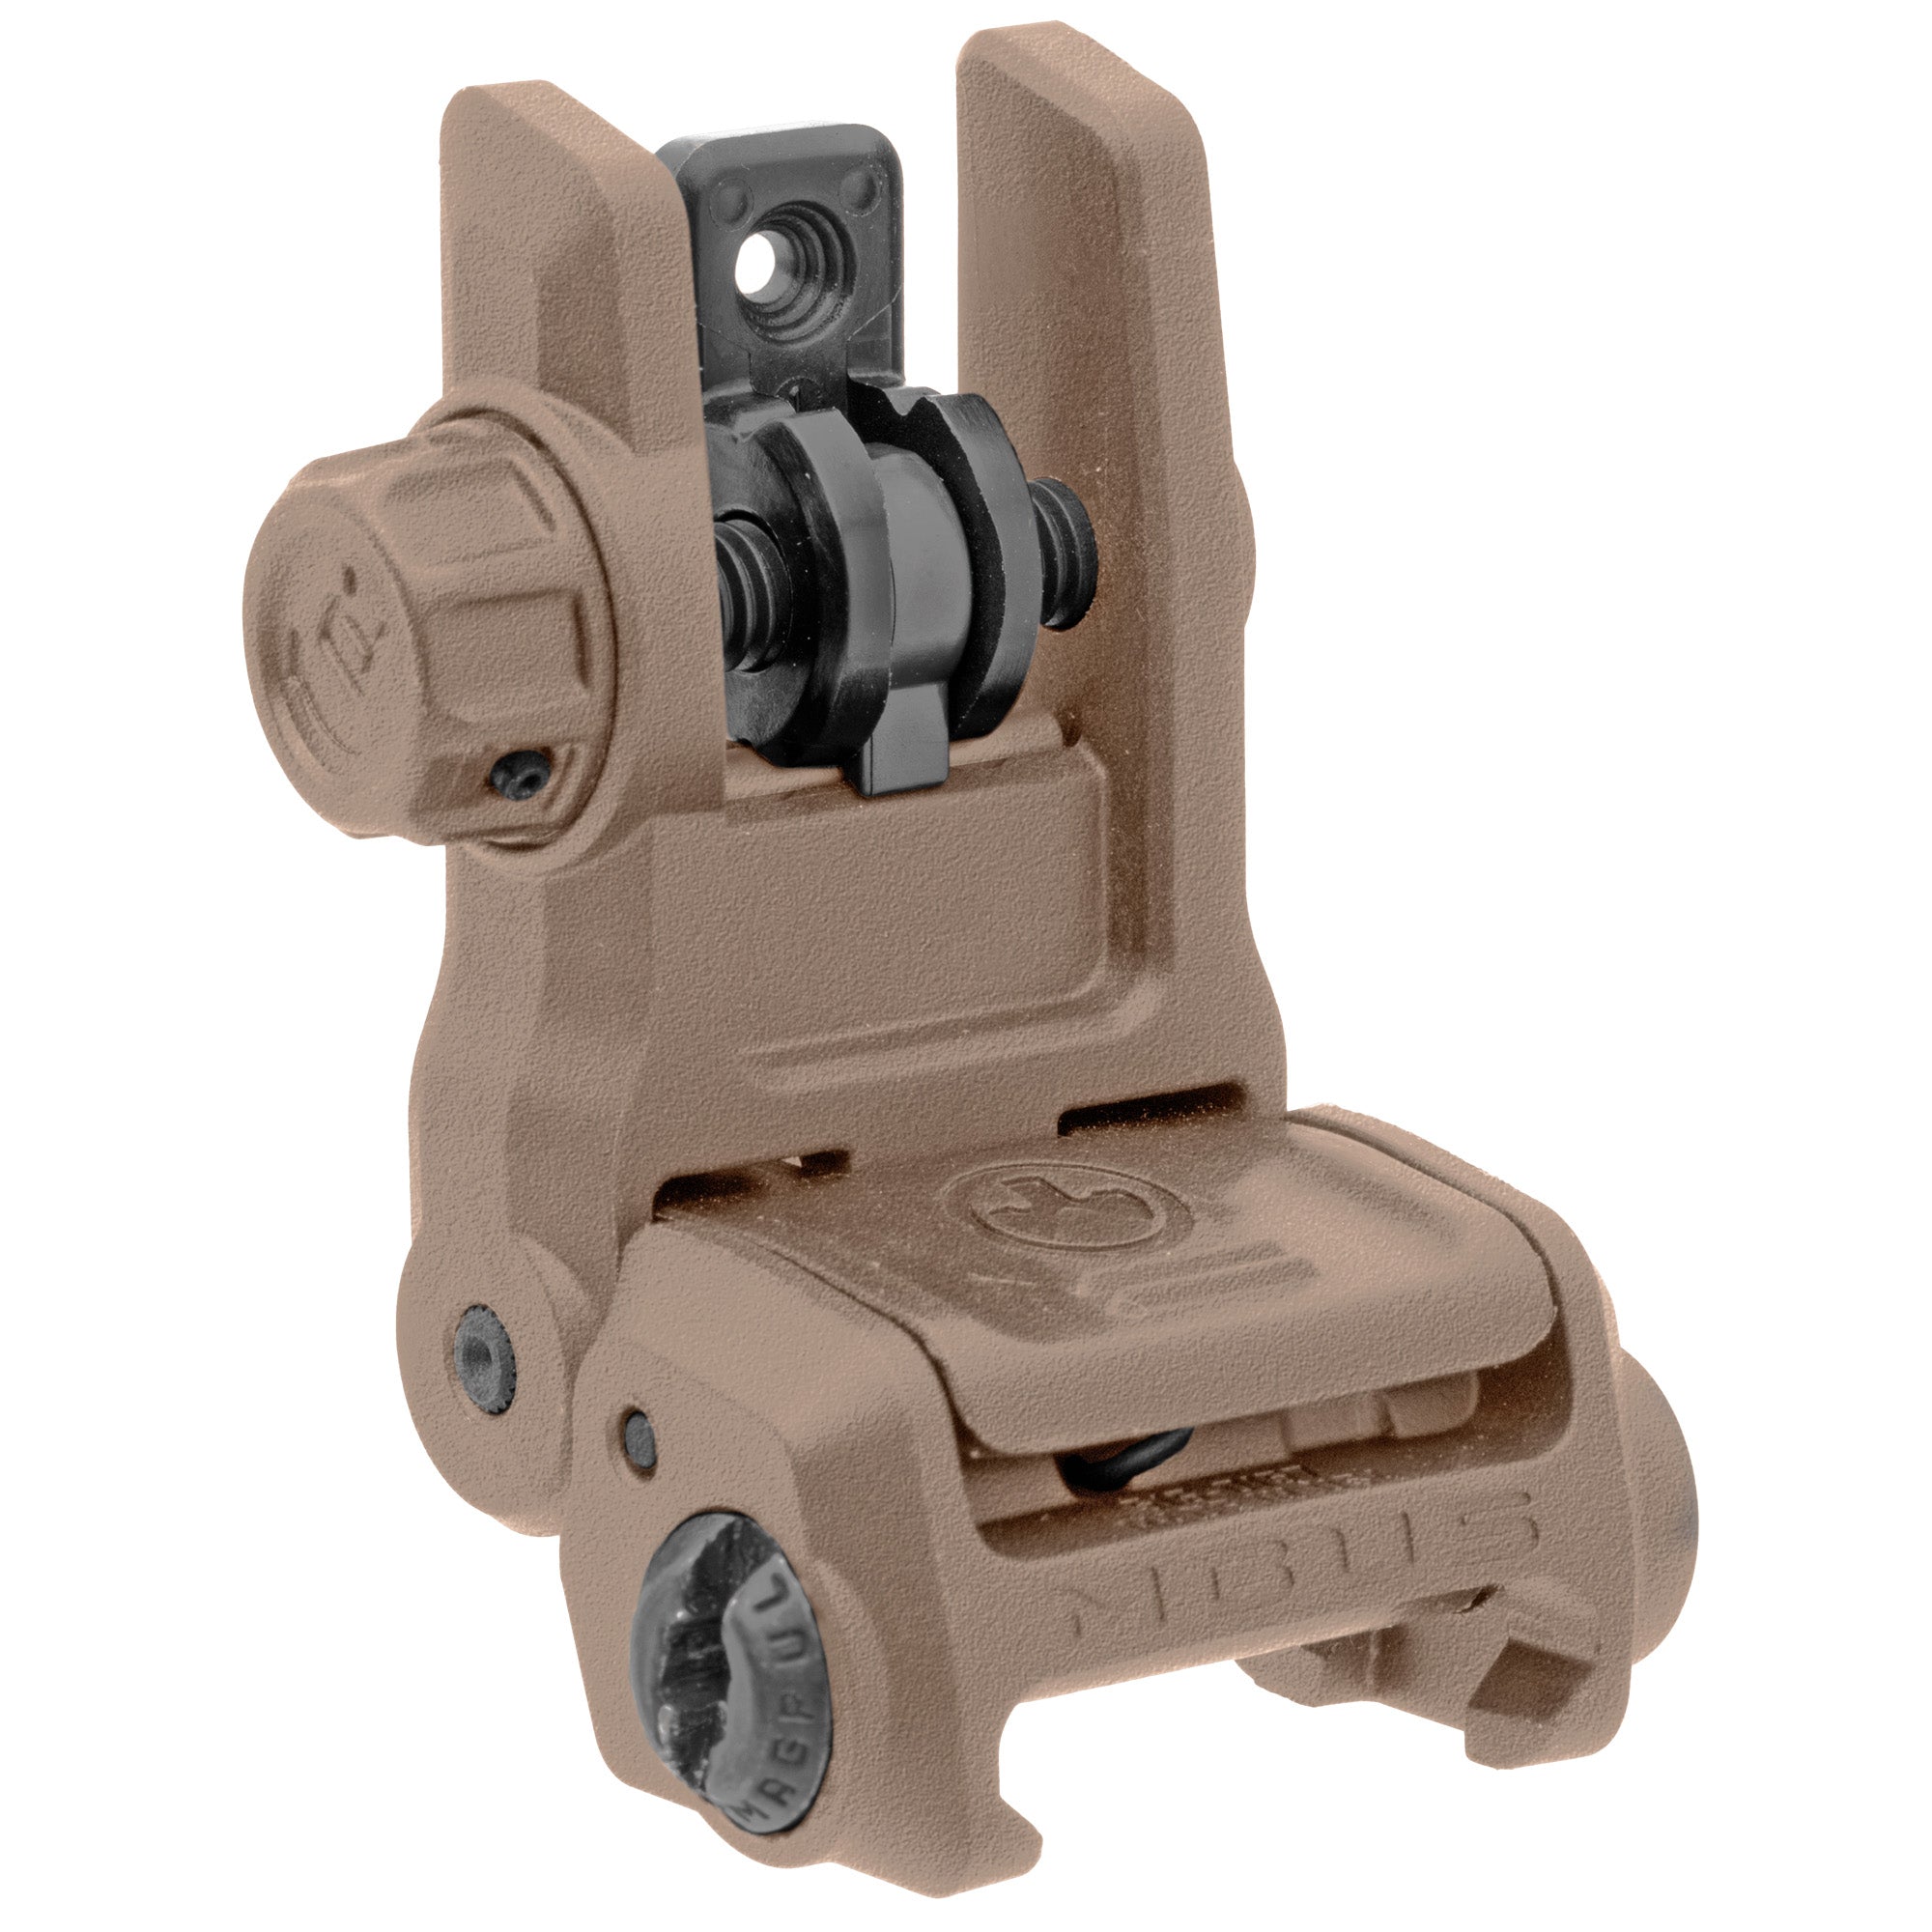 Magpul MBUS 3 Sights - Front, Rear, or Combo - Black, OD Green, FDE